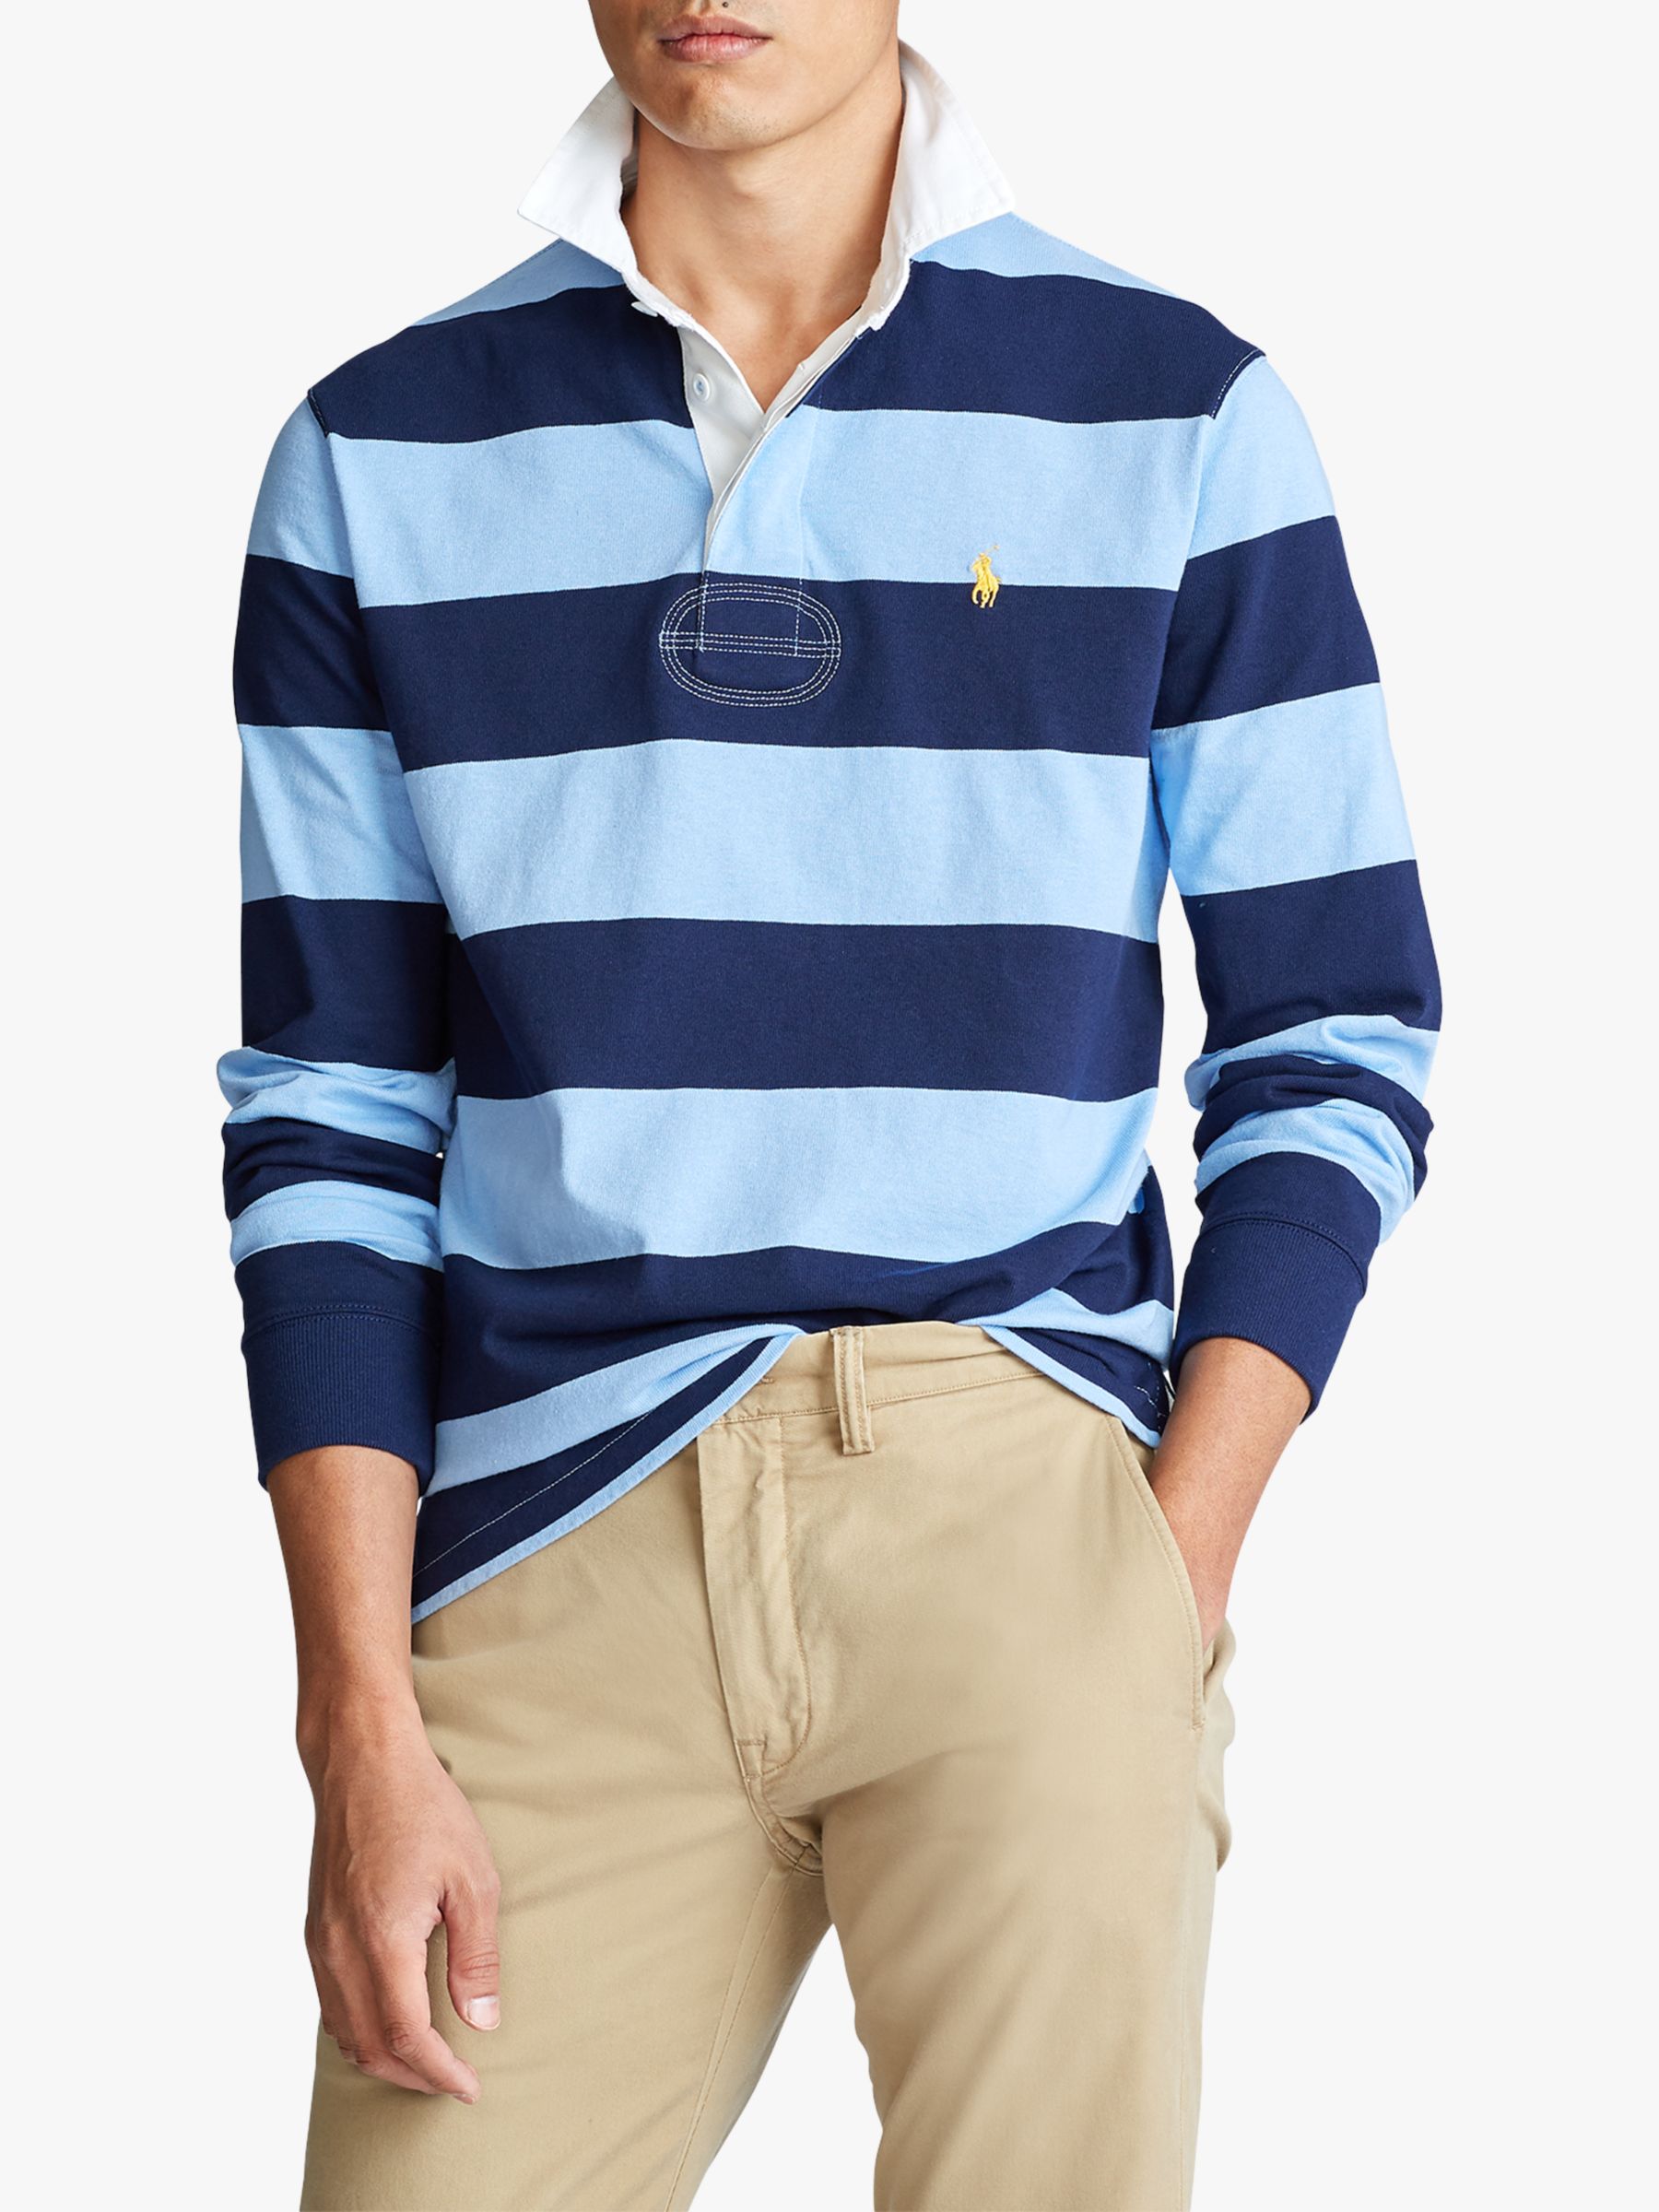 Polo Ralph Lauren Stripe Rugby Polo Shirt at John Lewis & Partners